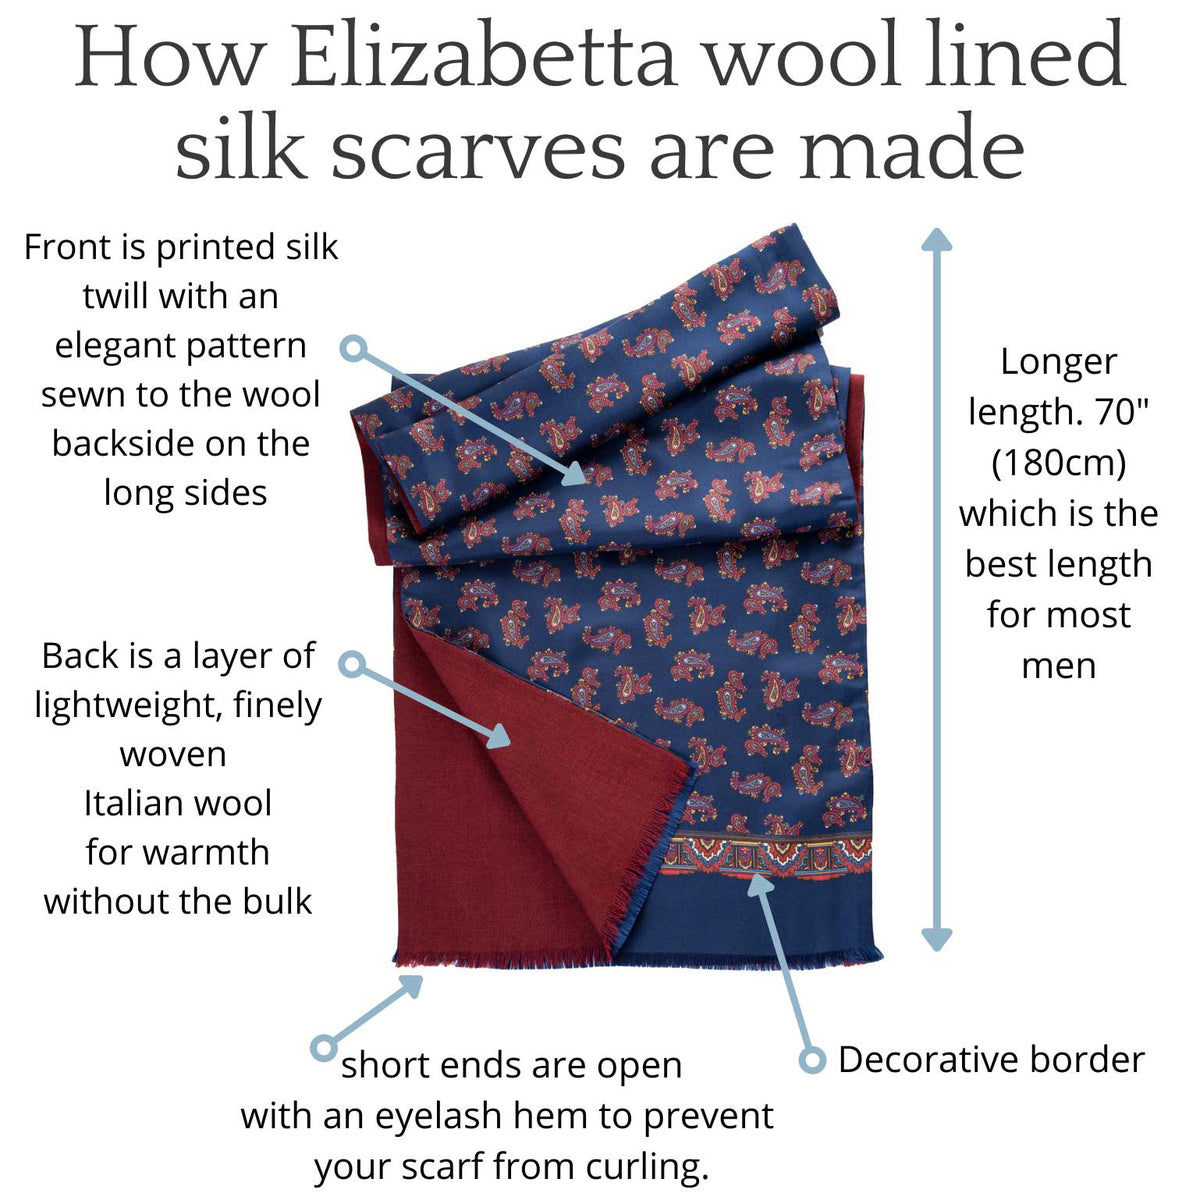 How an Elizabetta wool lined silk scarves are made